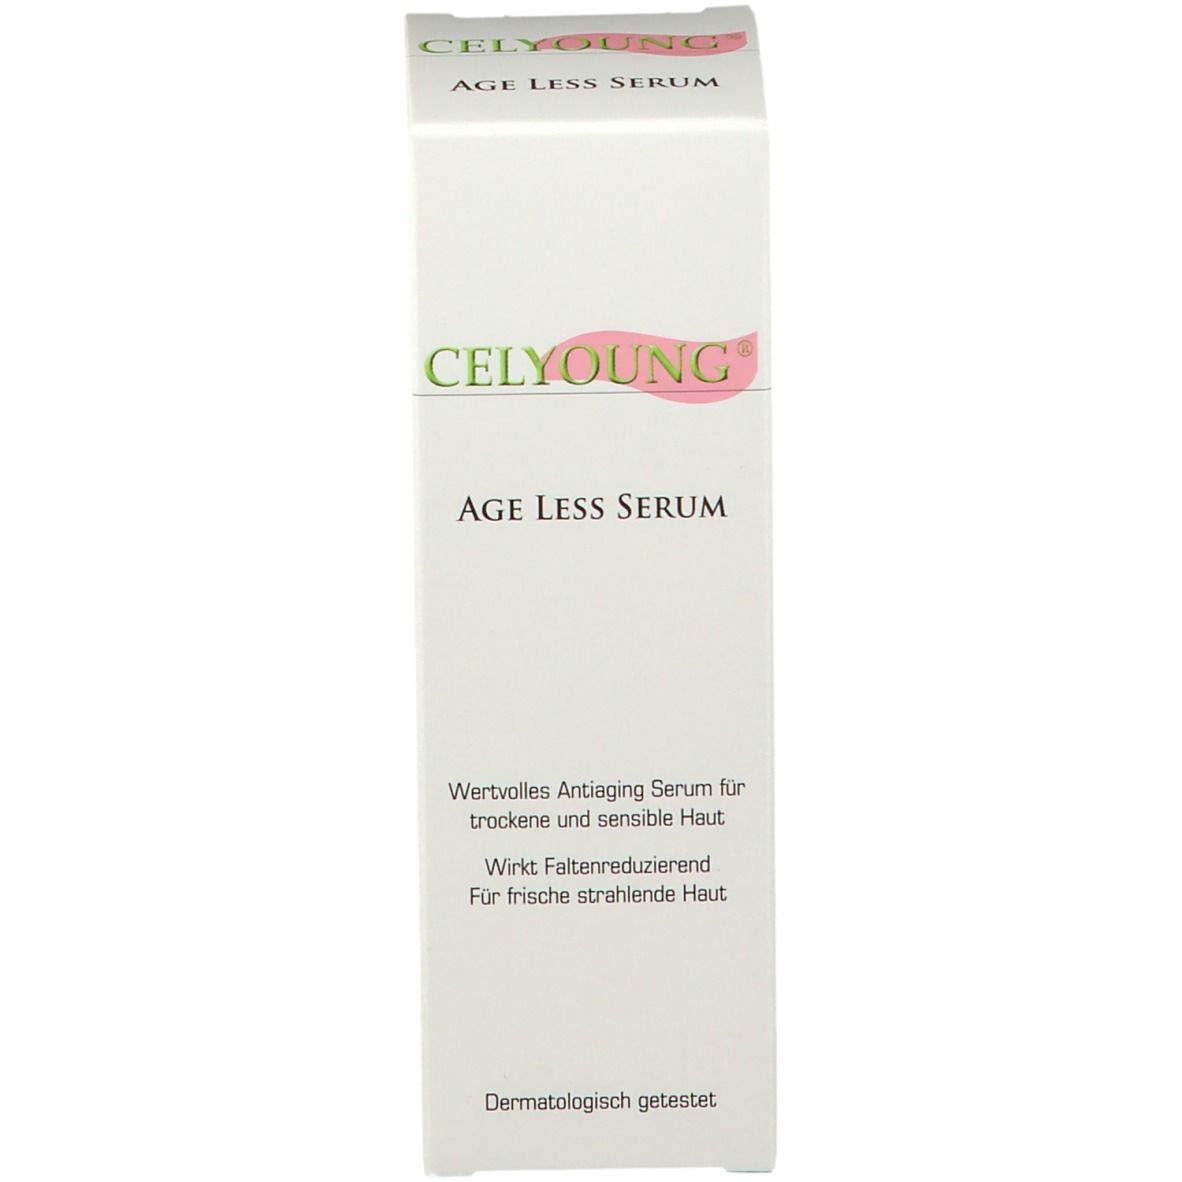 CELYOUNG® Age Less Serum